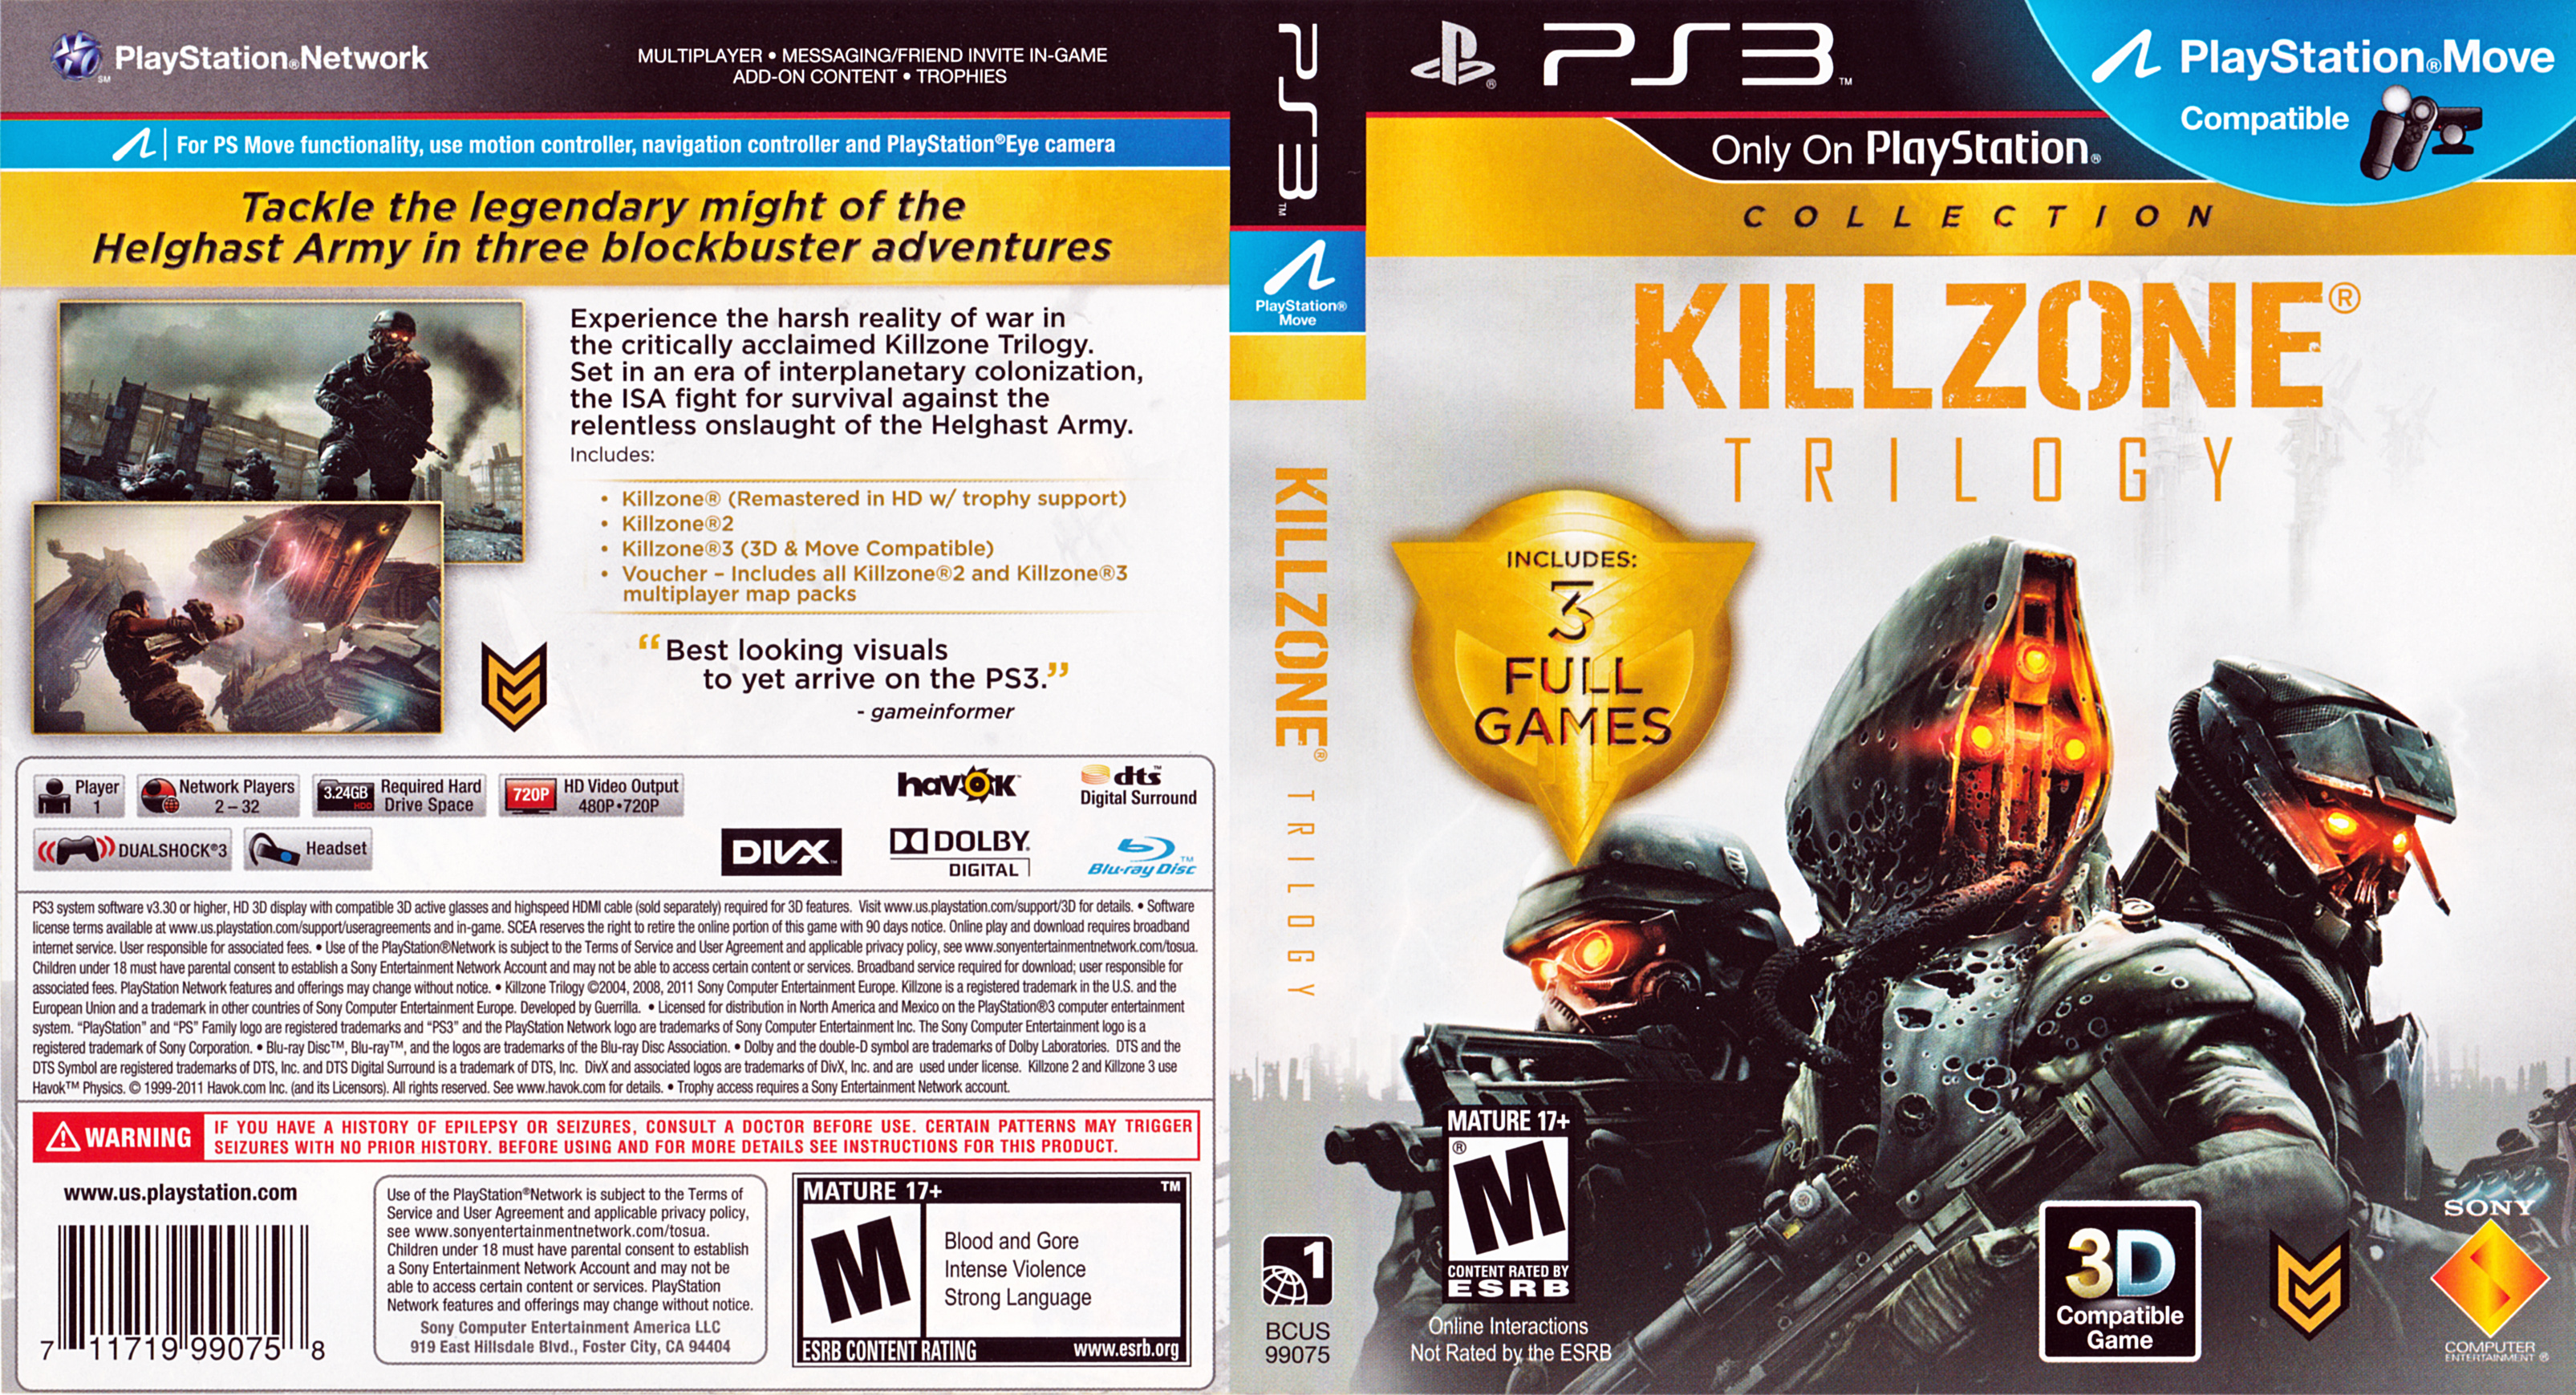 Legends of the zone trilogy ps4. Killzone 3 ps3 диск. Killzone 3 ps3 обложка рус. Killzone 3 ps3 обложка. Killzone 2 ps3 обложка.